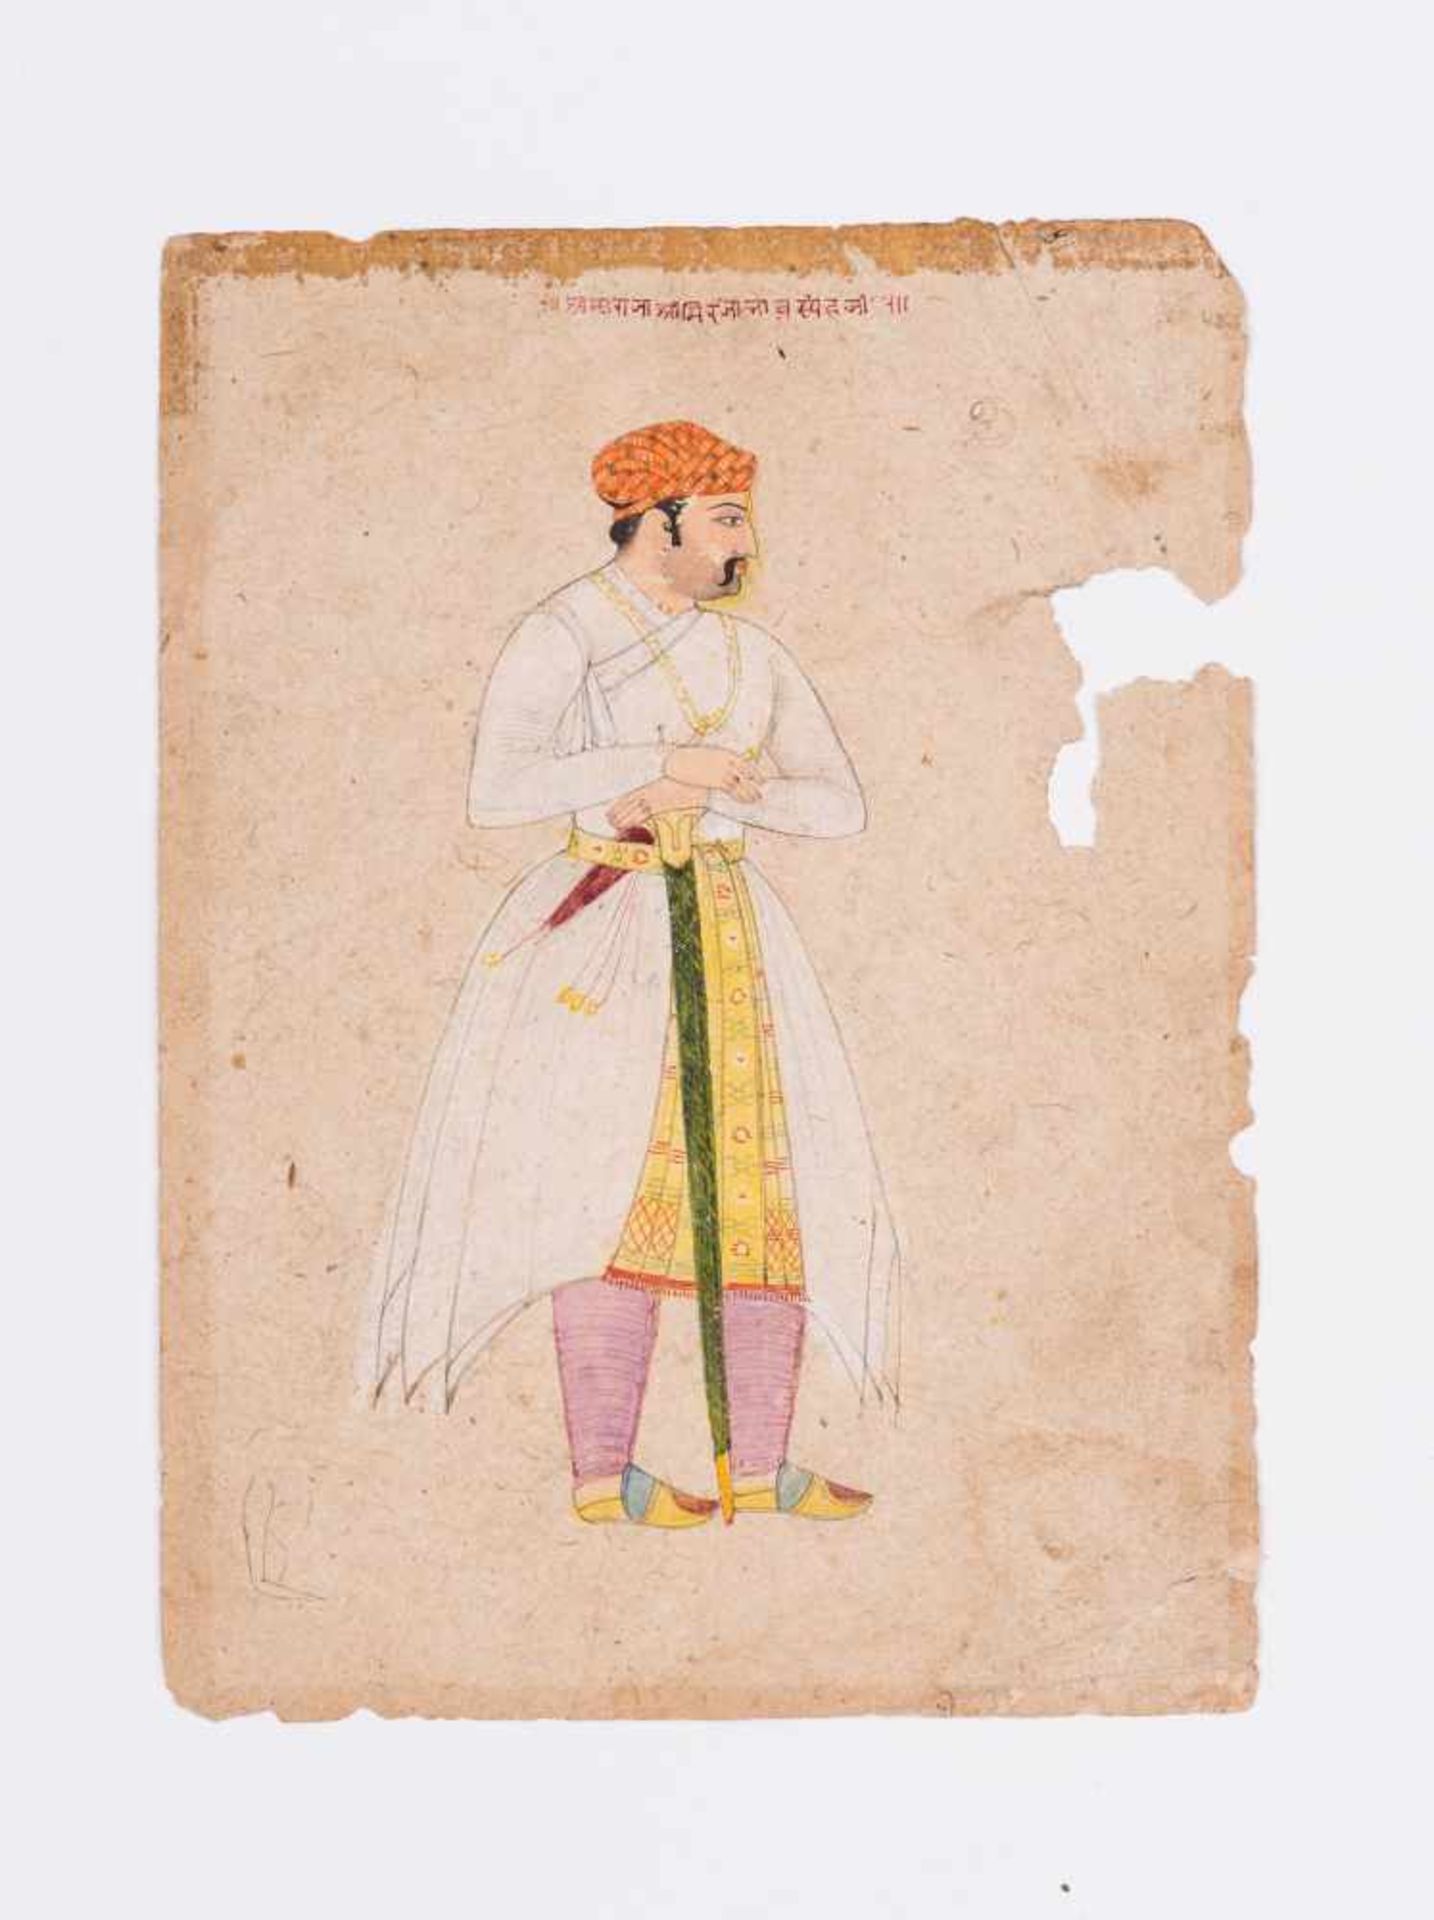 AN INDIAN MINIATURE PORTRAIT PAINTING - 19th CENTURYMiniature painting with colors on paperIndia,